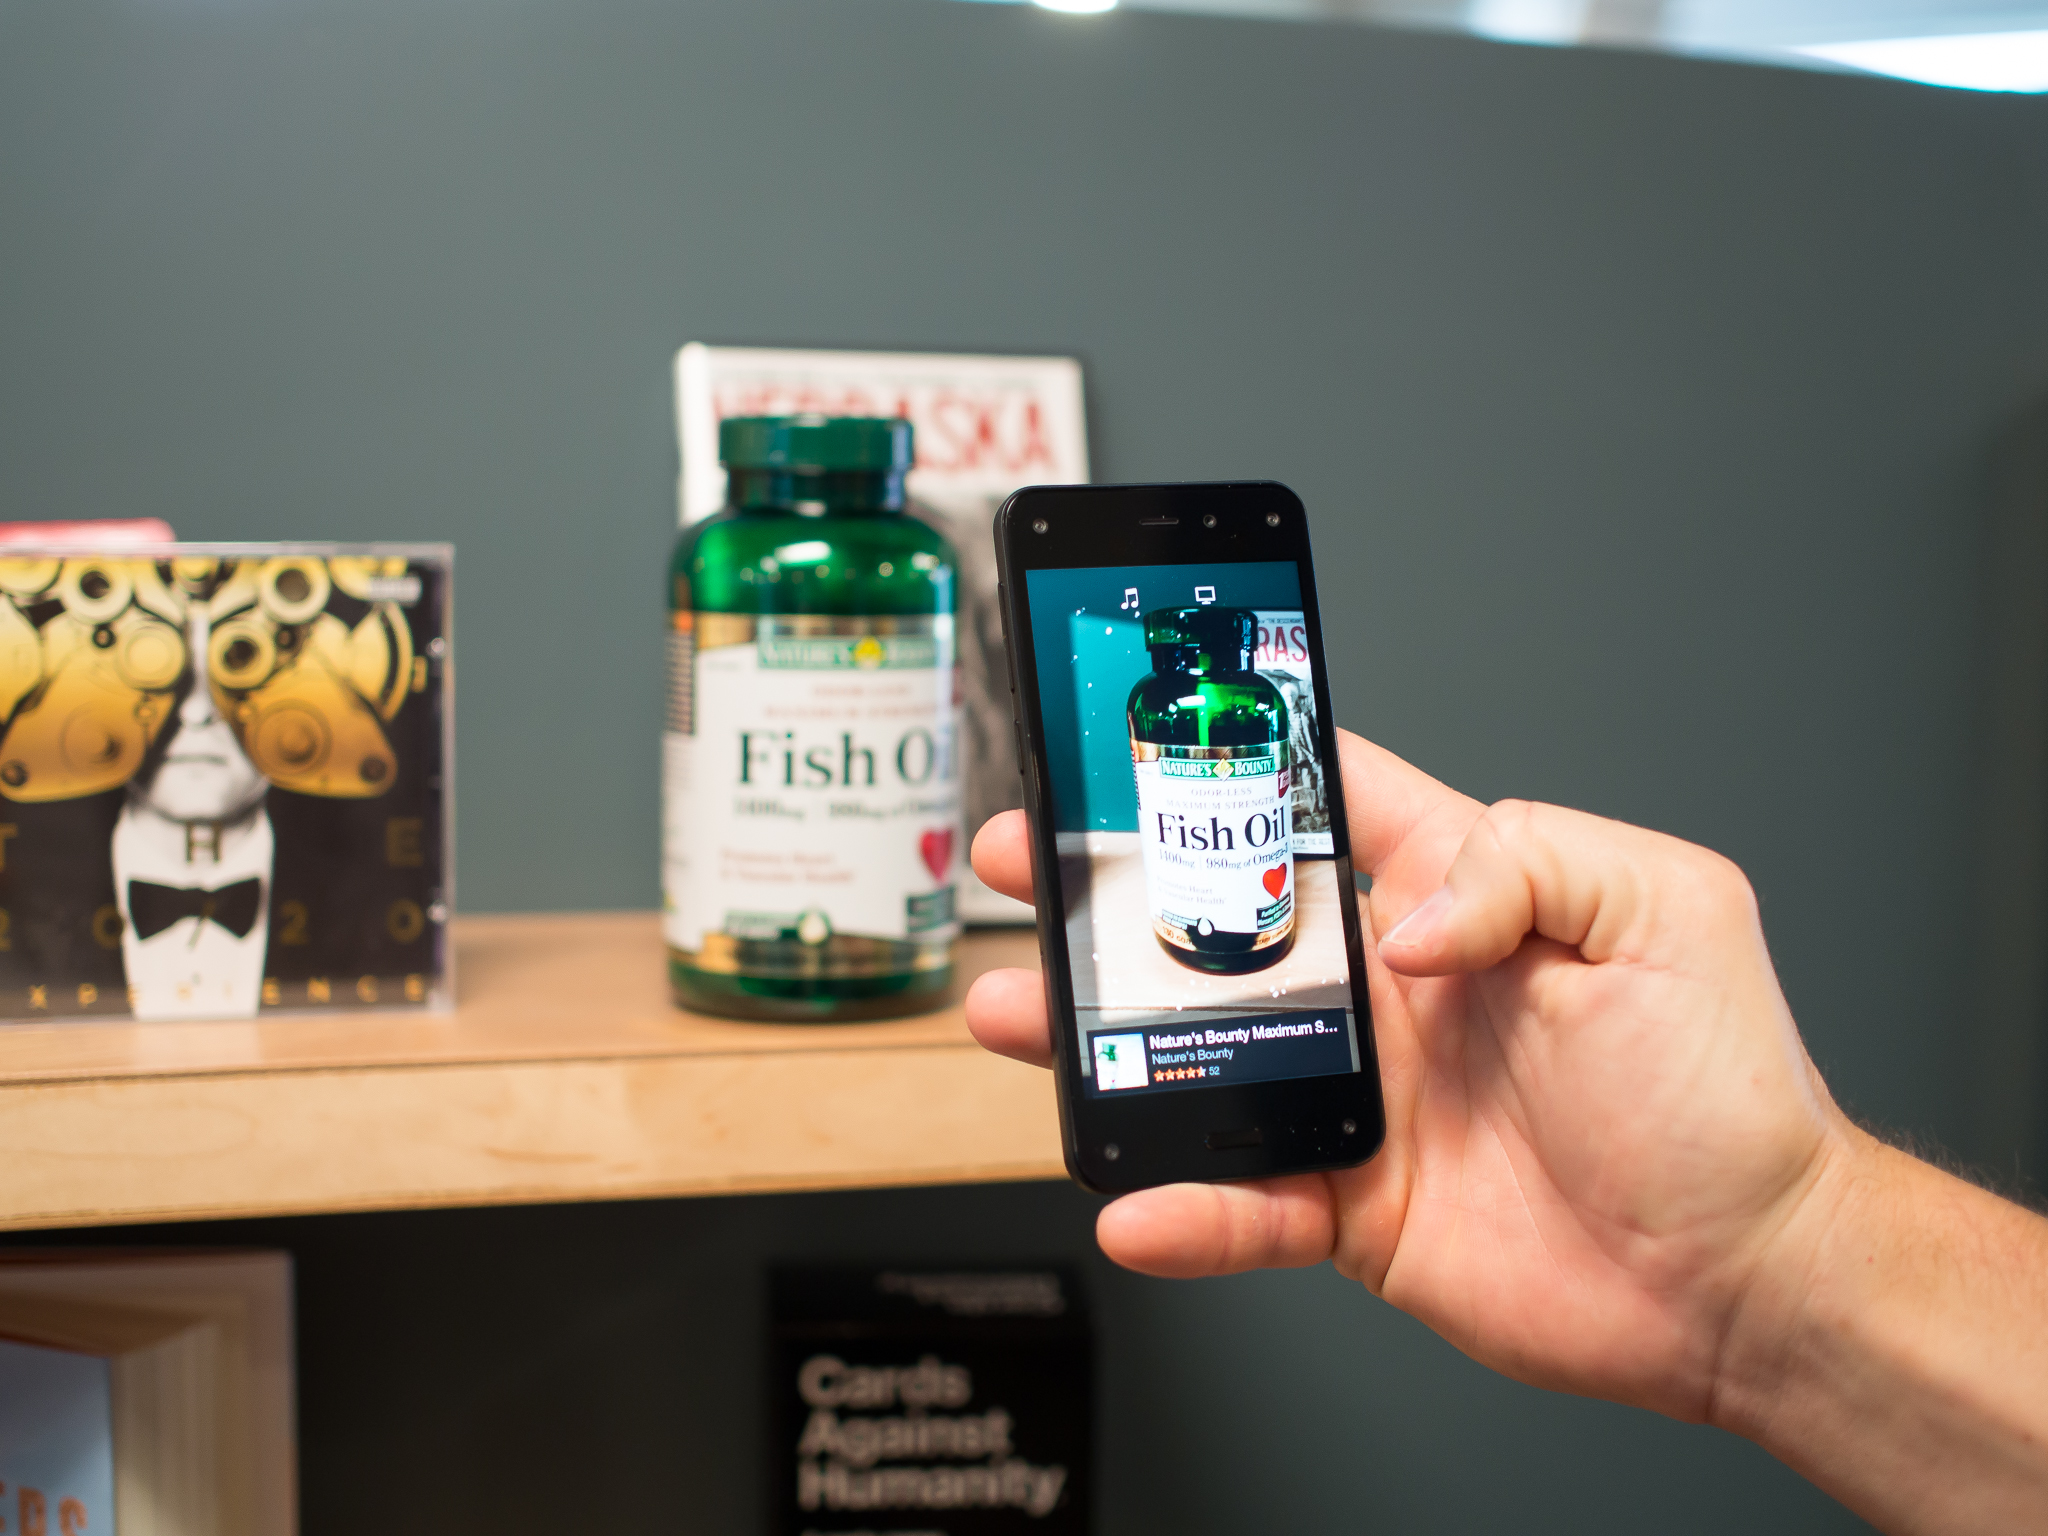 Should you buy an Apple iPhone or an Amazon Fire Phone?